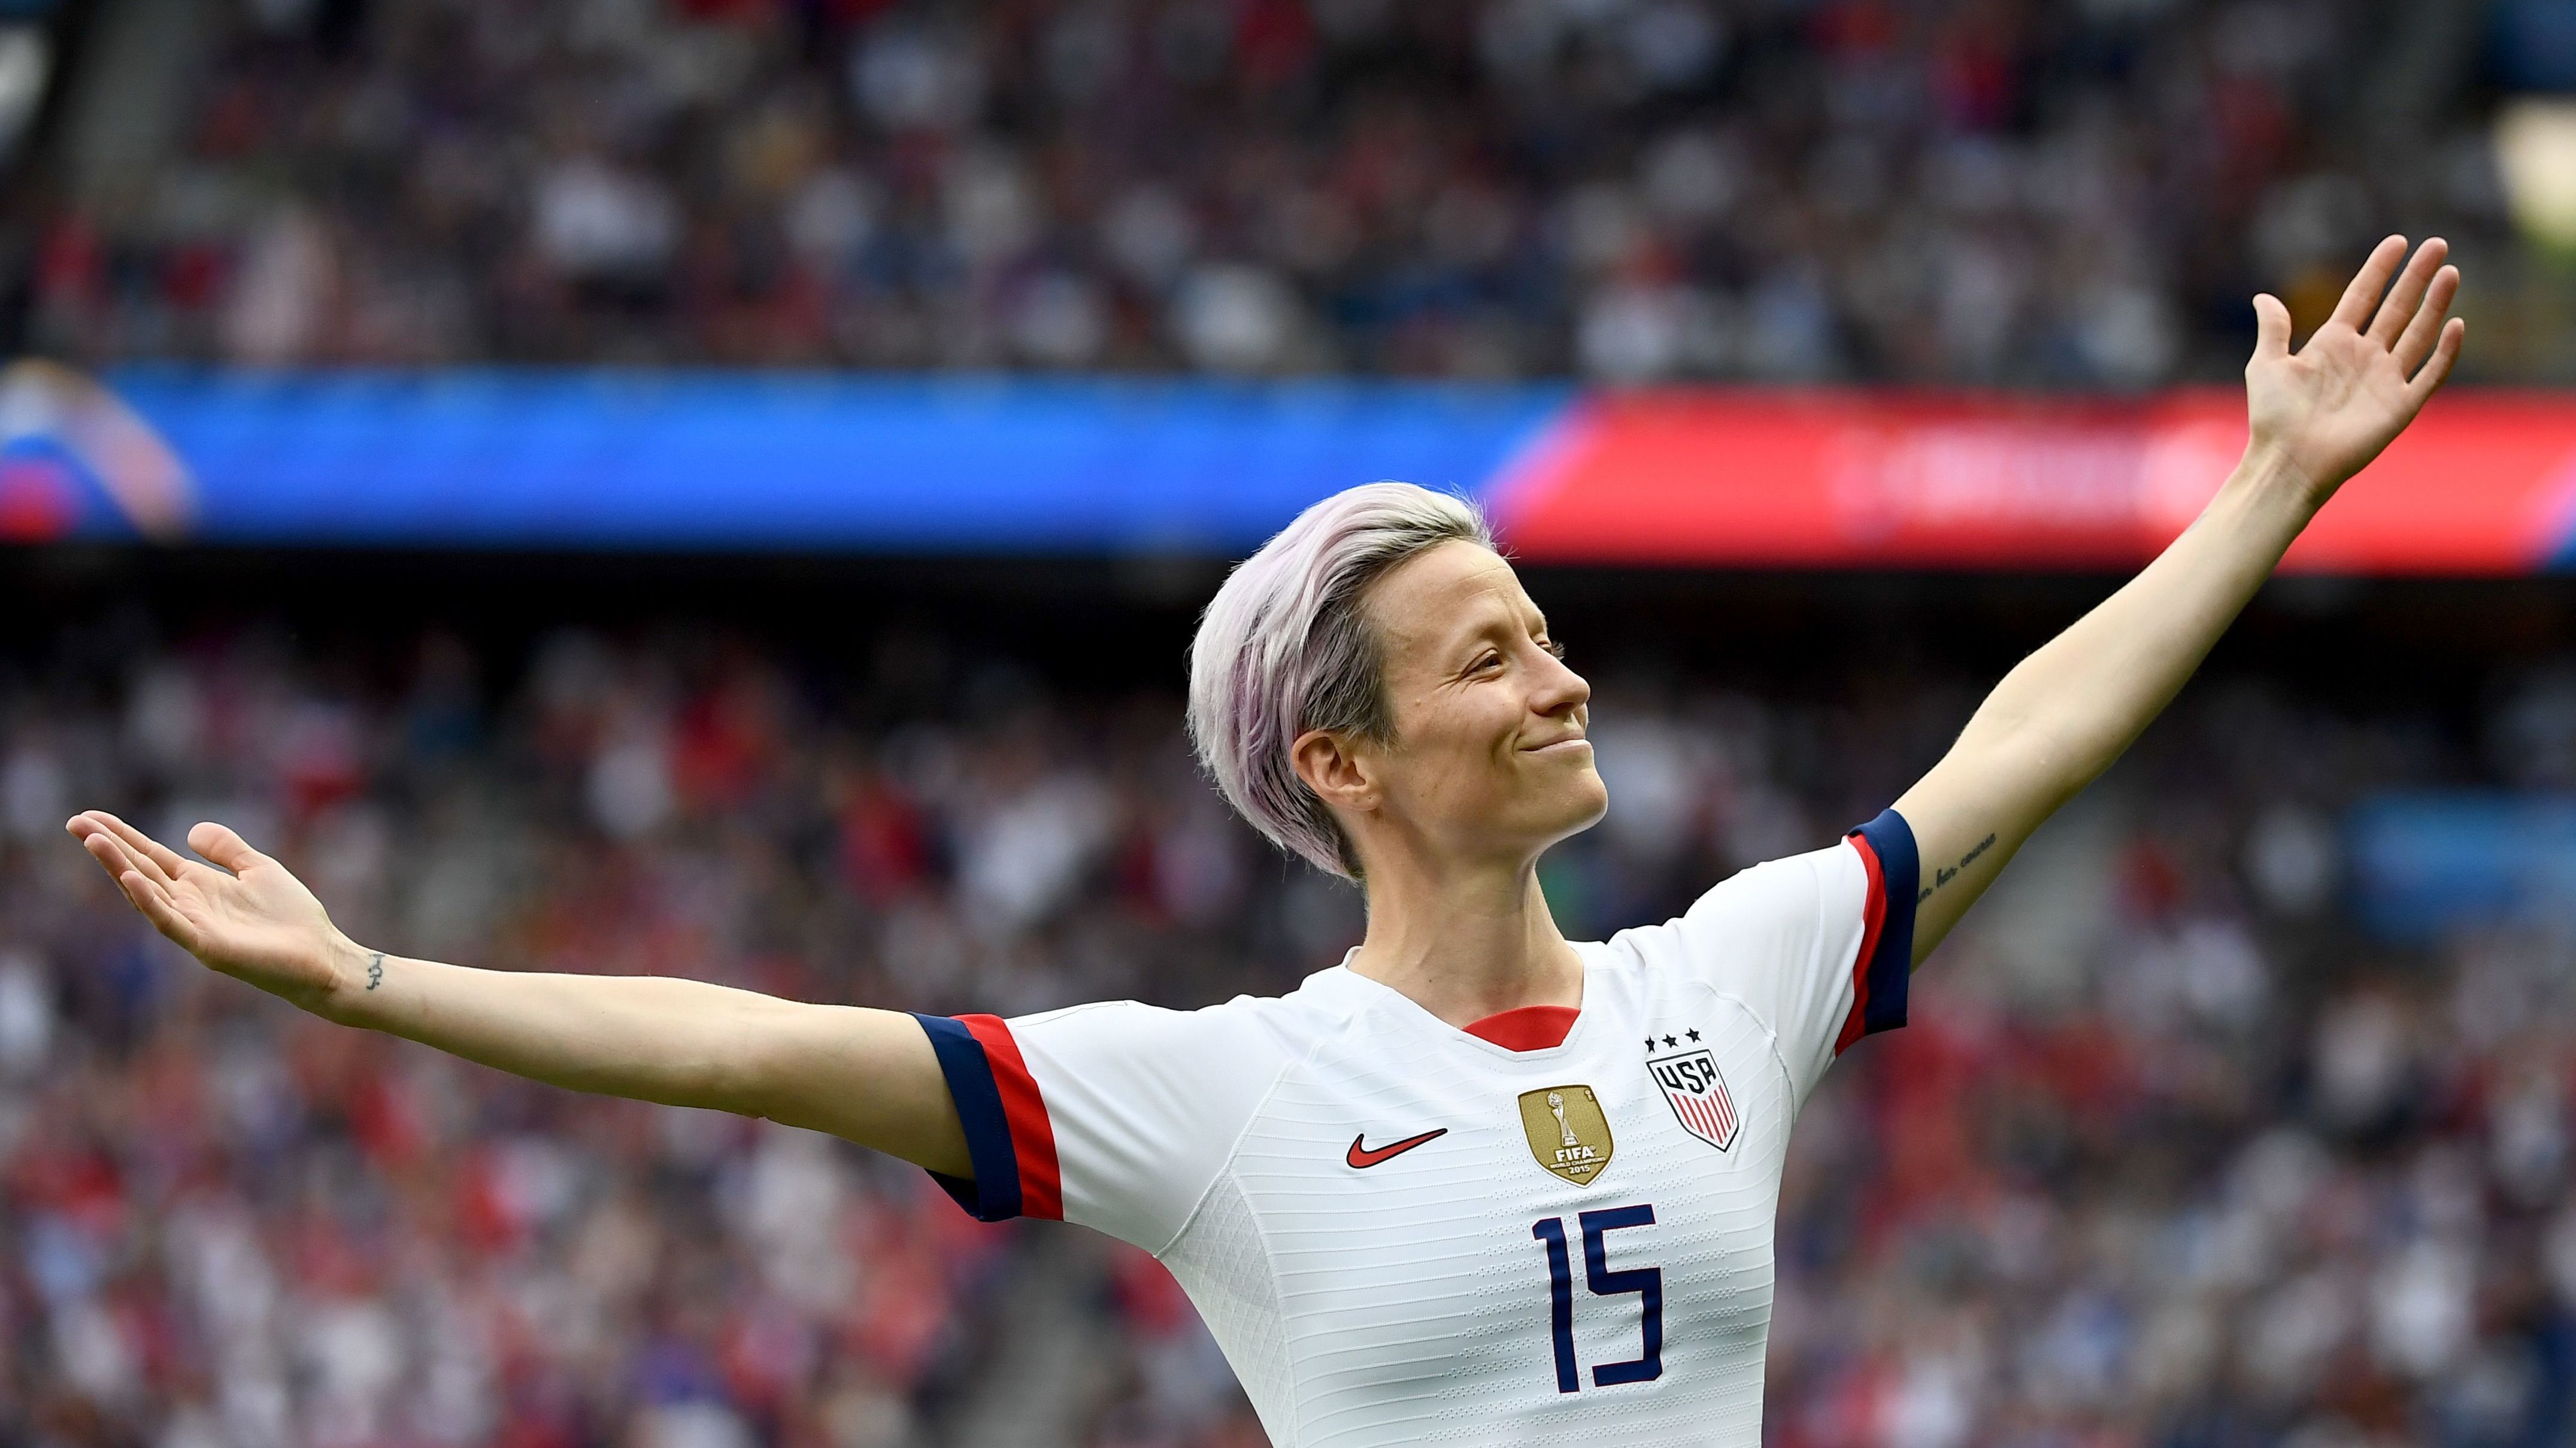 Soccer Star Megan Rapinoe On Equal Pay, And What The . Flag Means To Her  : NPR